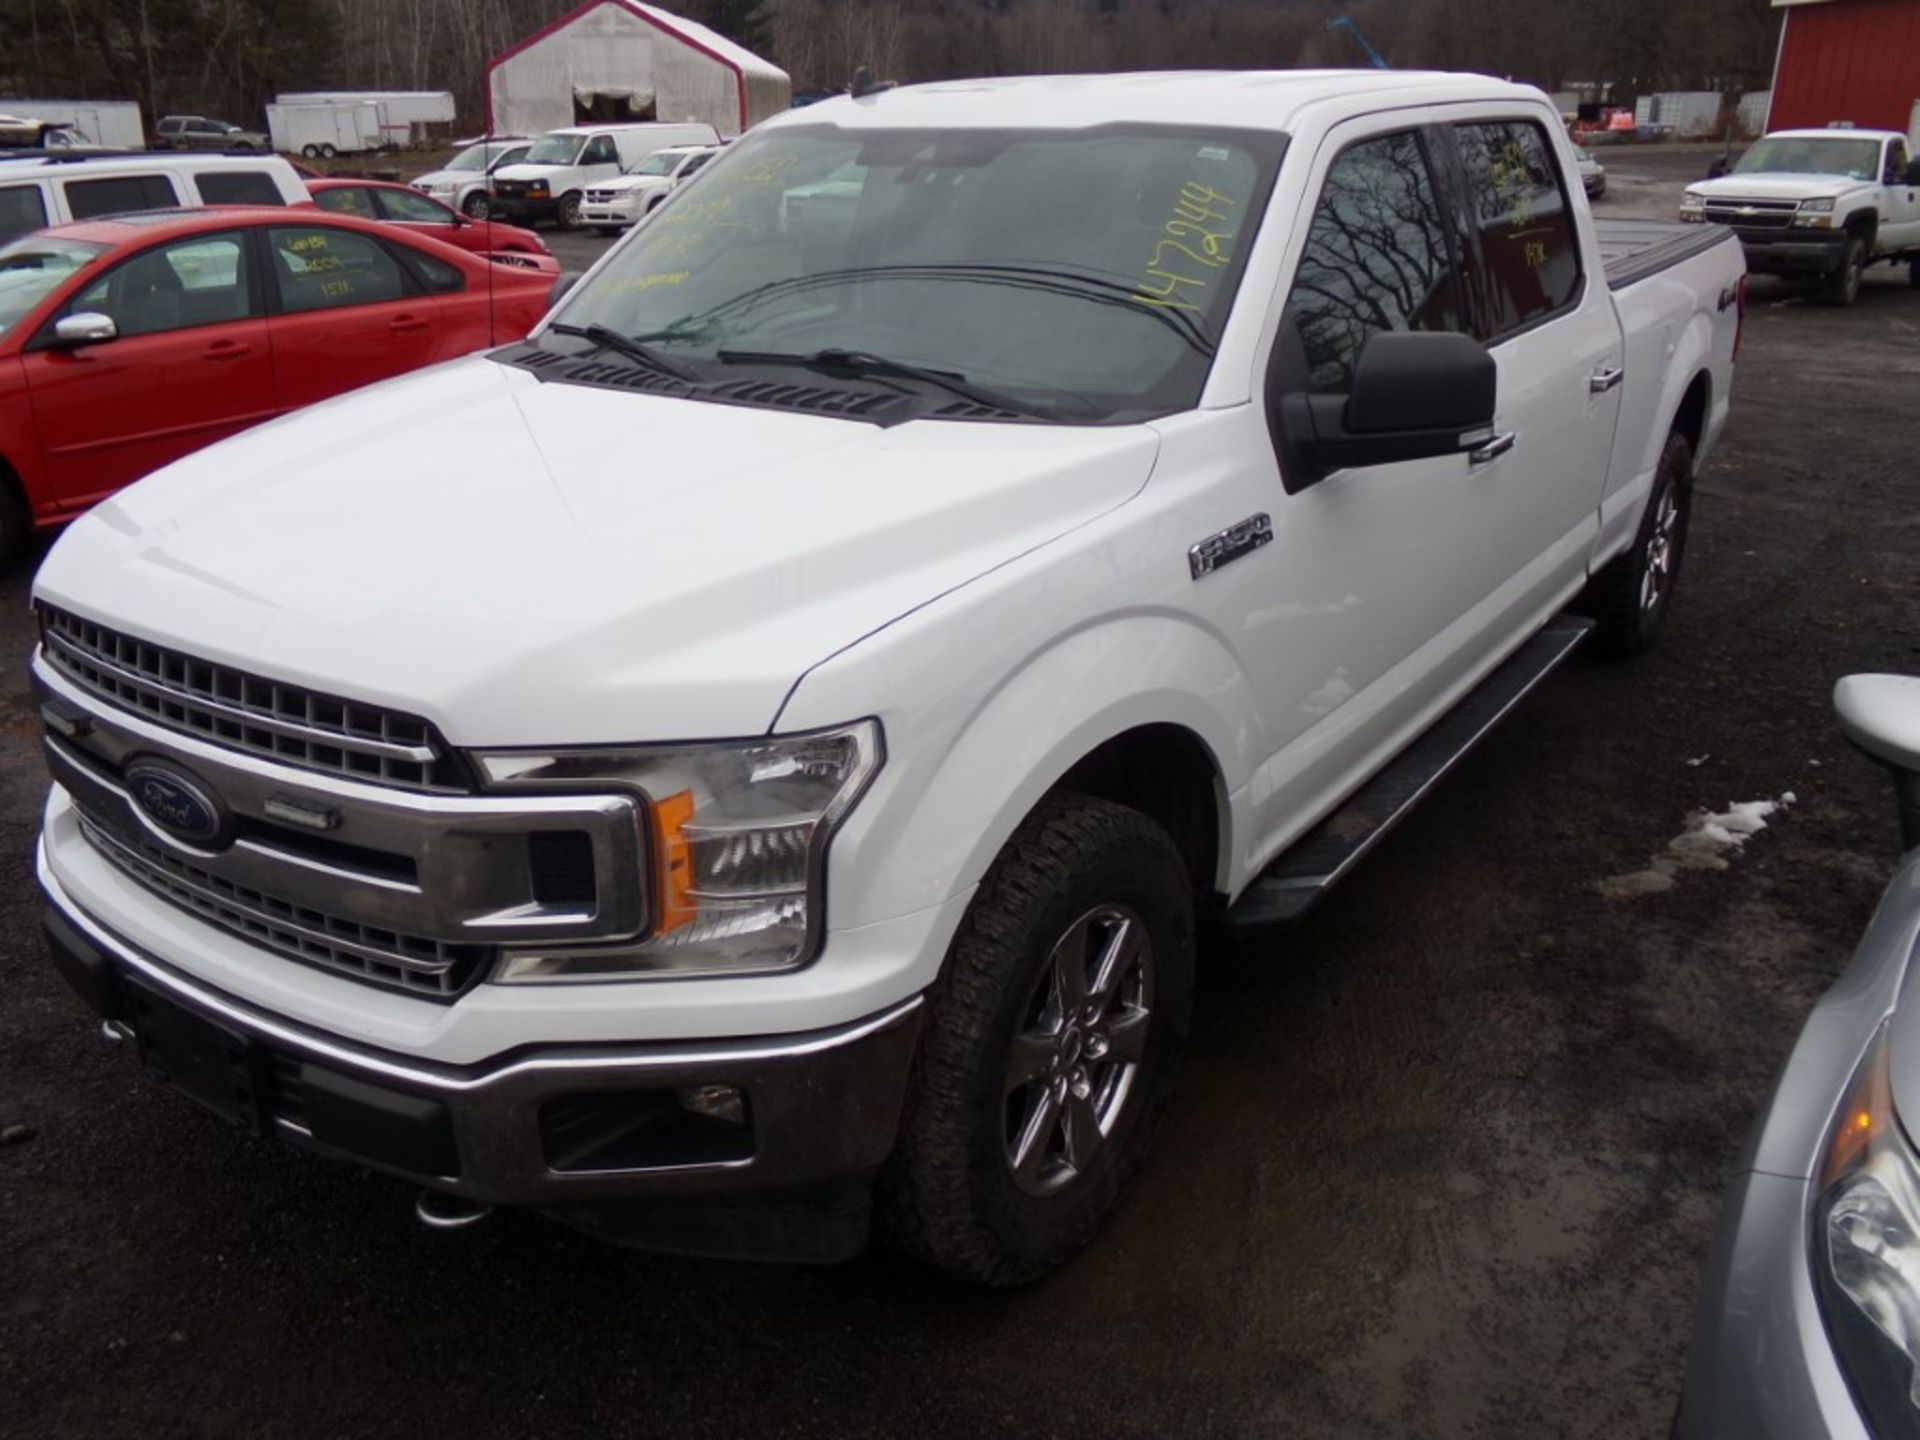 2019 Ford F150 XLT, 4x4, Crew Cab, Toneau Cover, 5.0 V8 Eng, Loaded, White, 147,244 Mi, Vin#